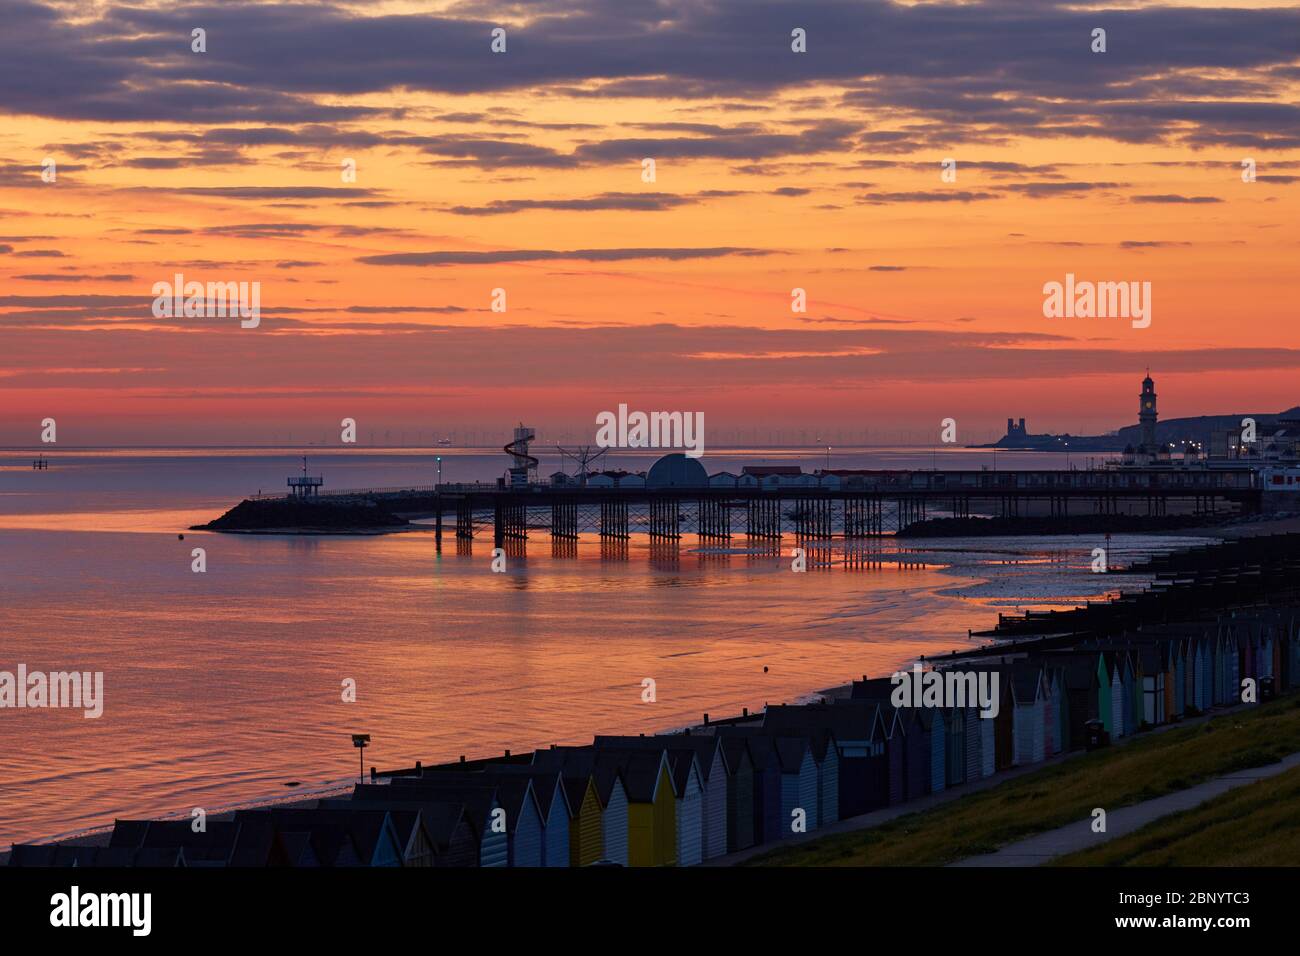 Herne Bay, Kent, UK. 17th May 2020: UK Weather. Dawn just before sunrise at Herne Bay with the pier, clocktower and on the horizon Reculver Towers silhouetted by the early morning glow. Fine warm weather is forecast for the week ahead as people take more advantage of the  reduced lockdown rules, but  they are still asked to think twice about travel to the seaside or beauty spots. Credit: Alan Payton/Alamy Live News Stock Photo